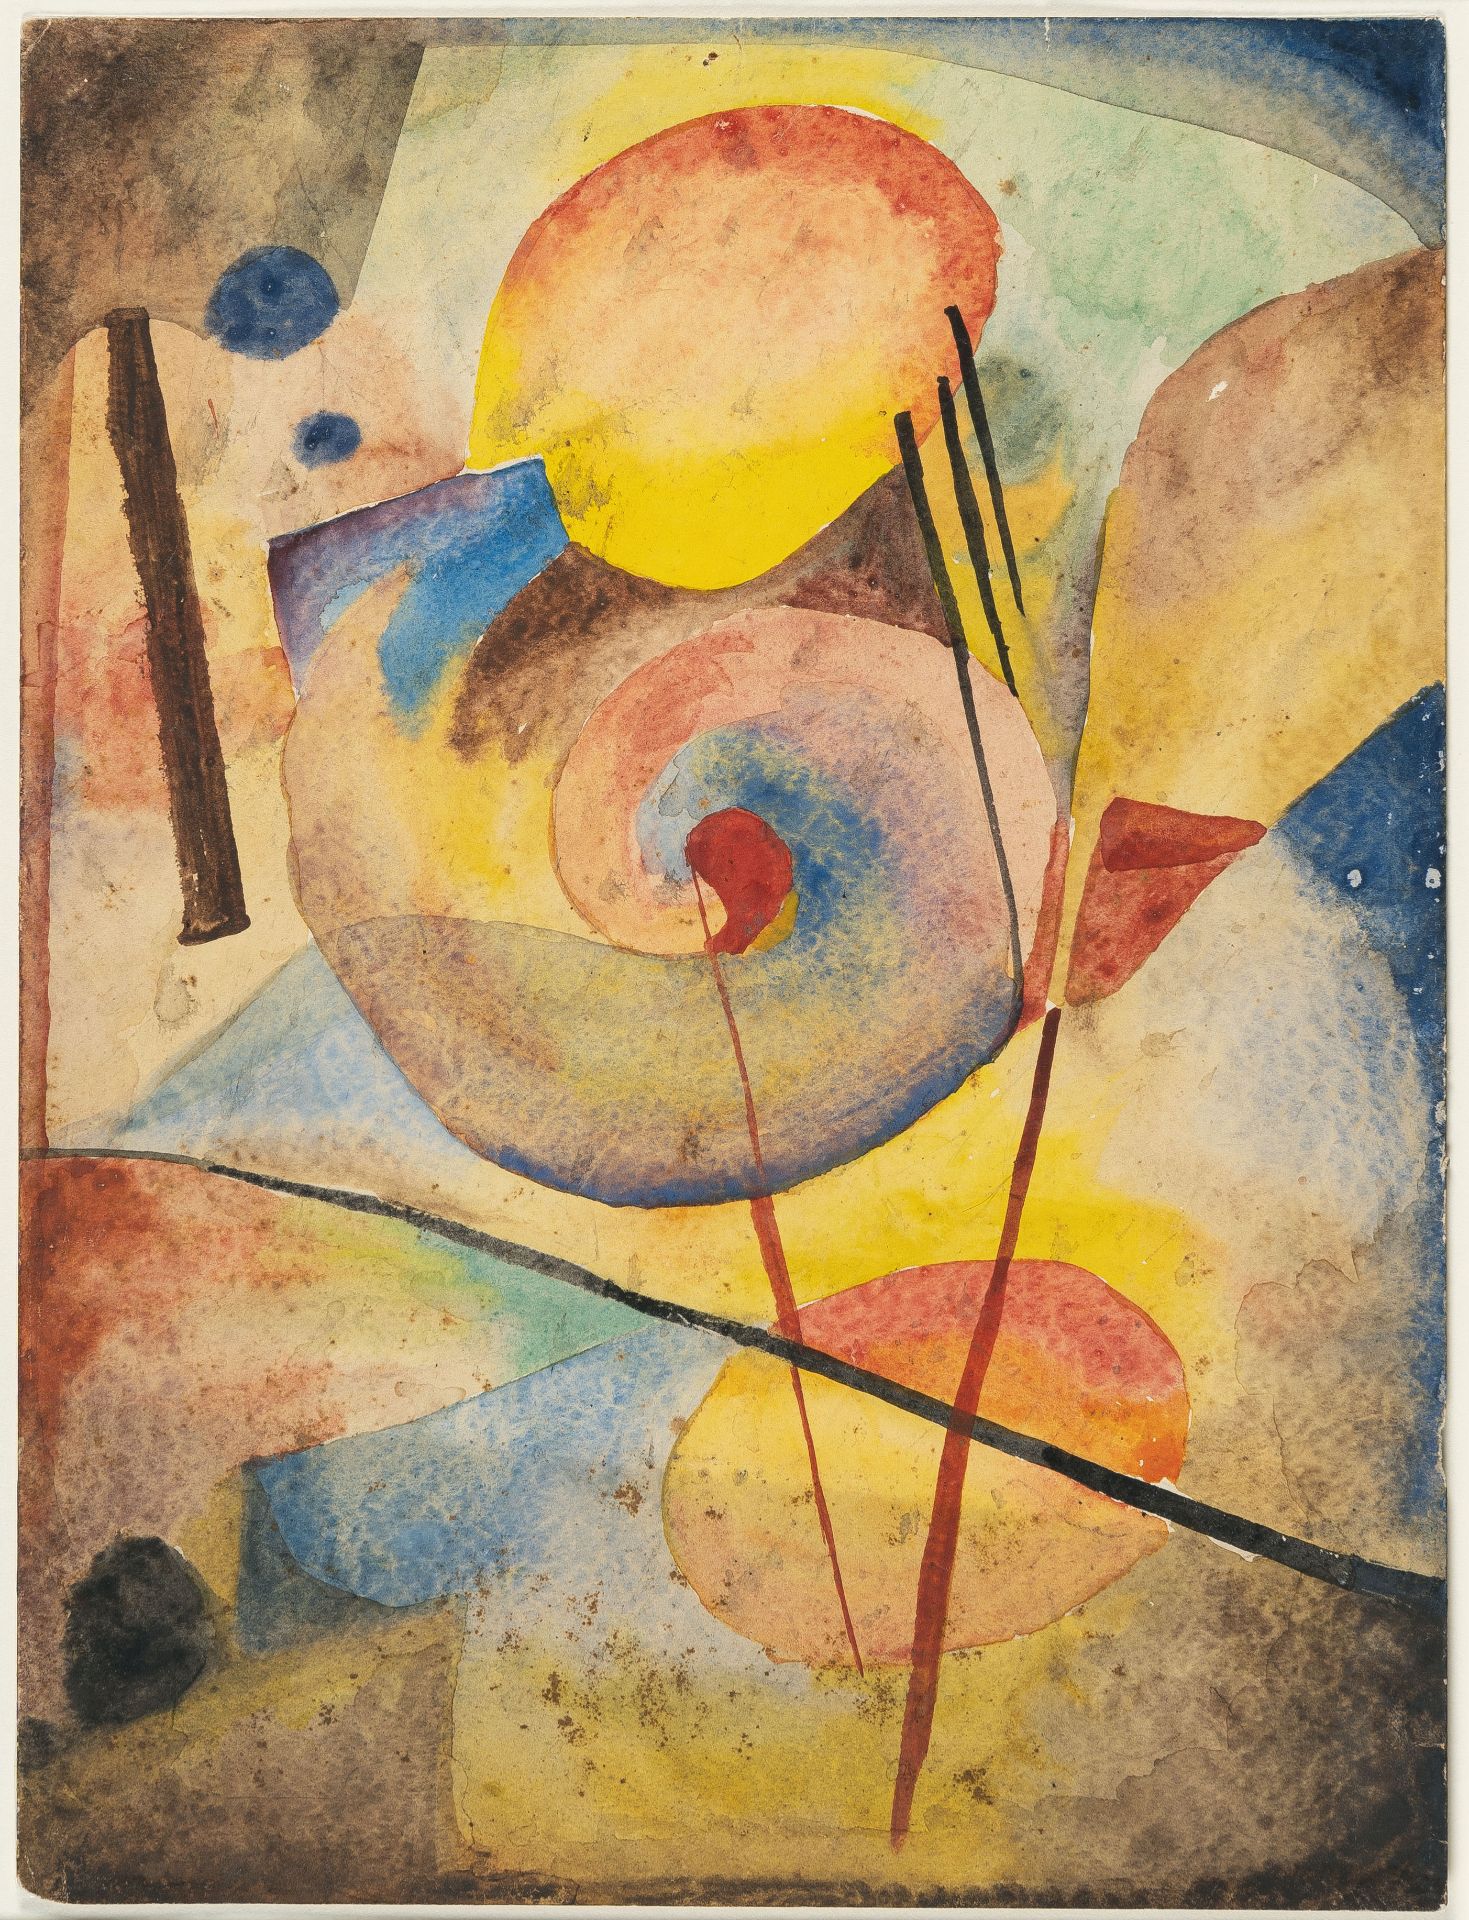 Fritz Stuckenberg, Untitled (Composition).Watercolour on firm, textured wove. (Ca. 1920). Ca. 31.5 x - Image 2 of 3